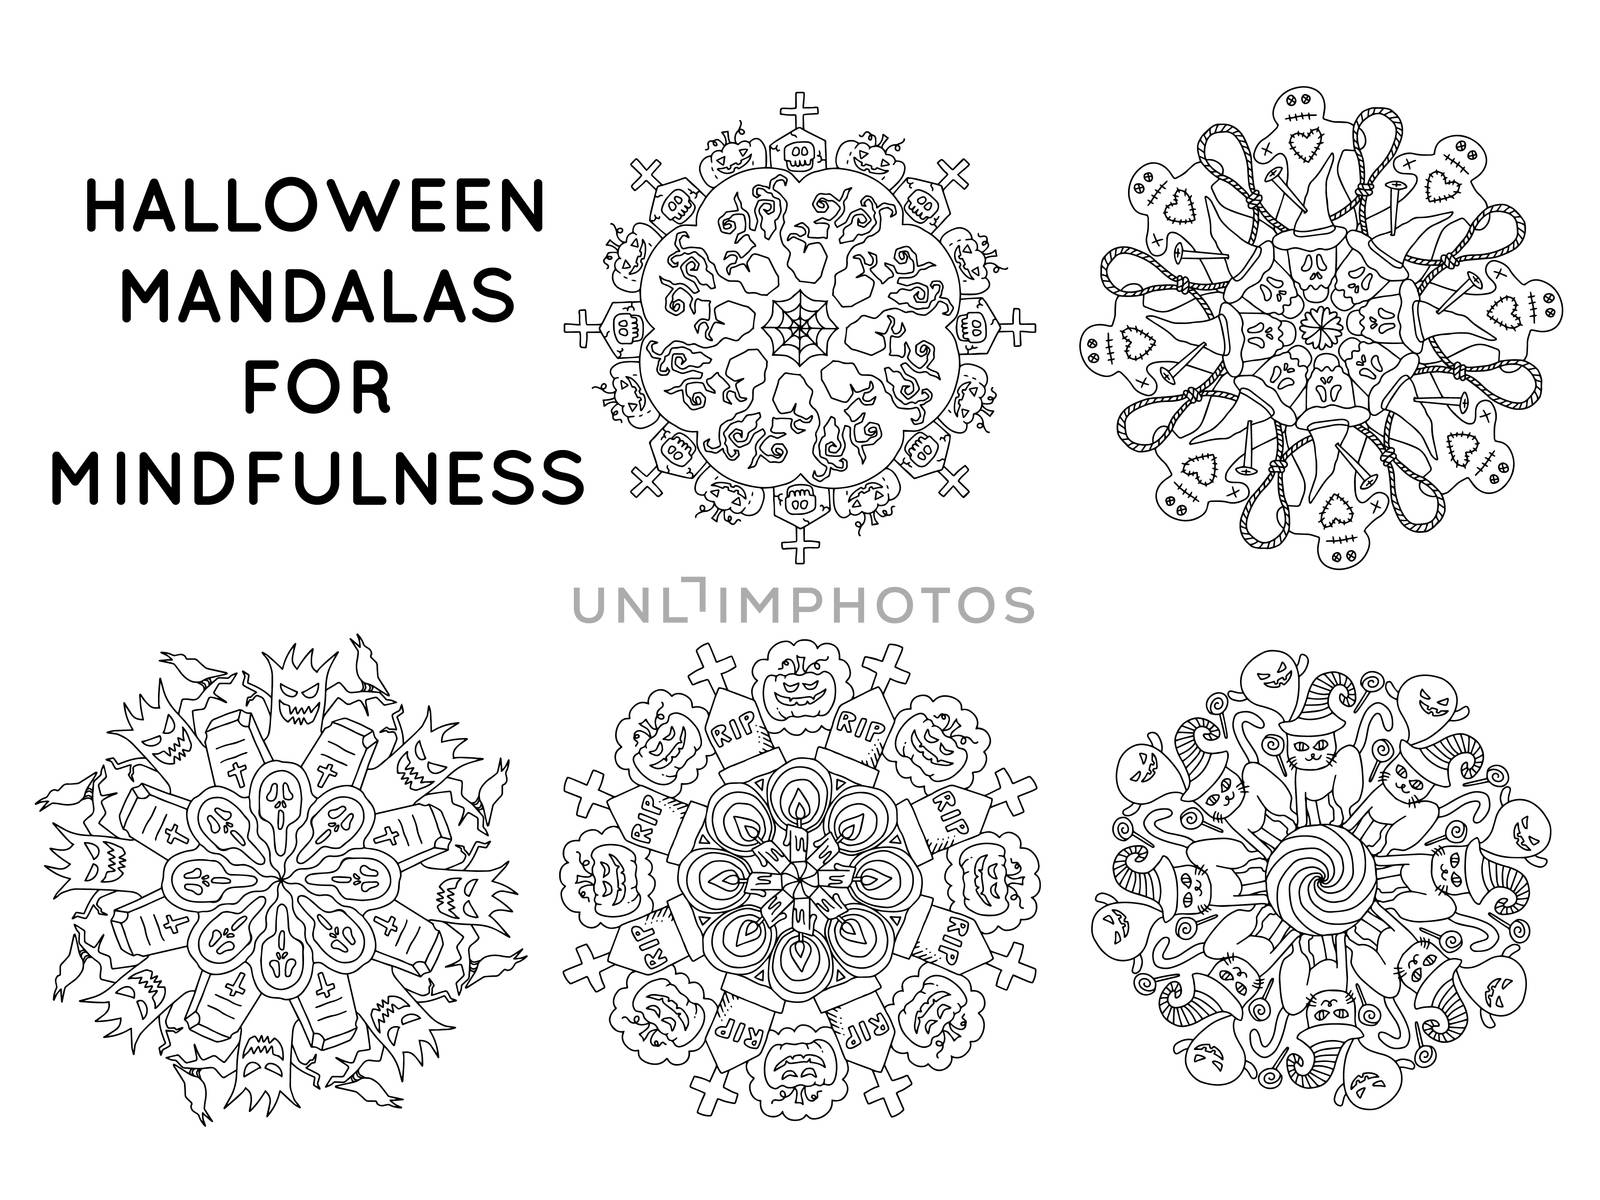 Halloween mandala outline patterns for coloring books